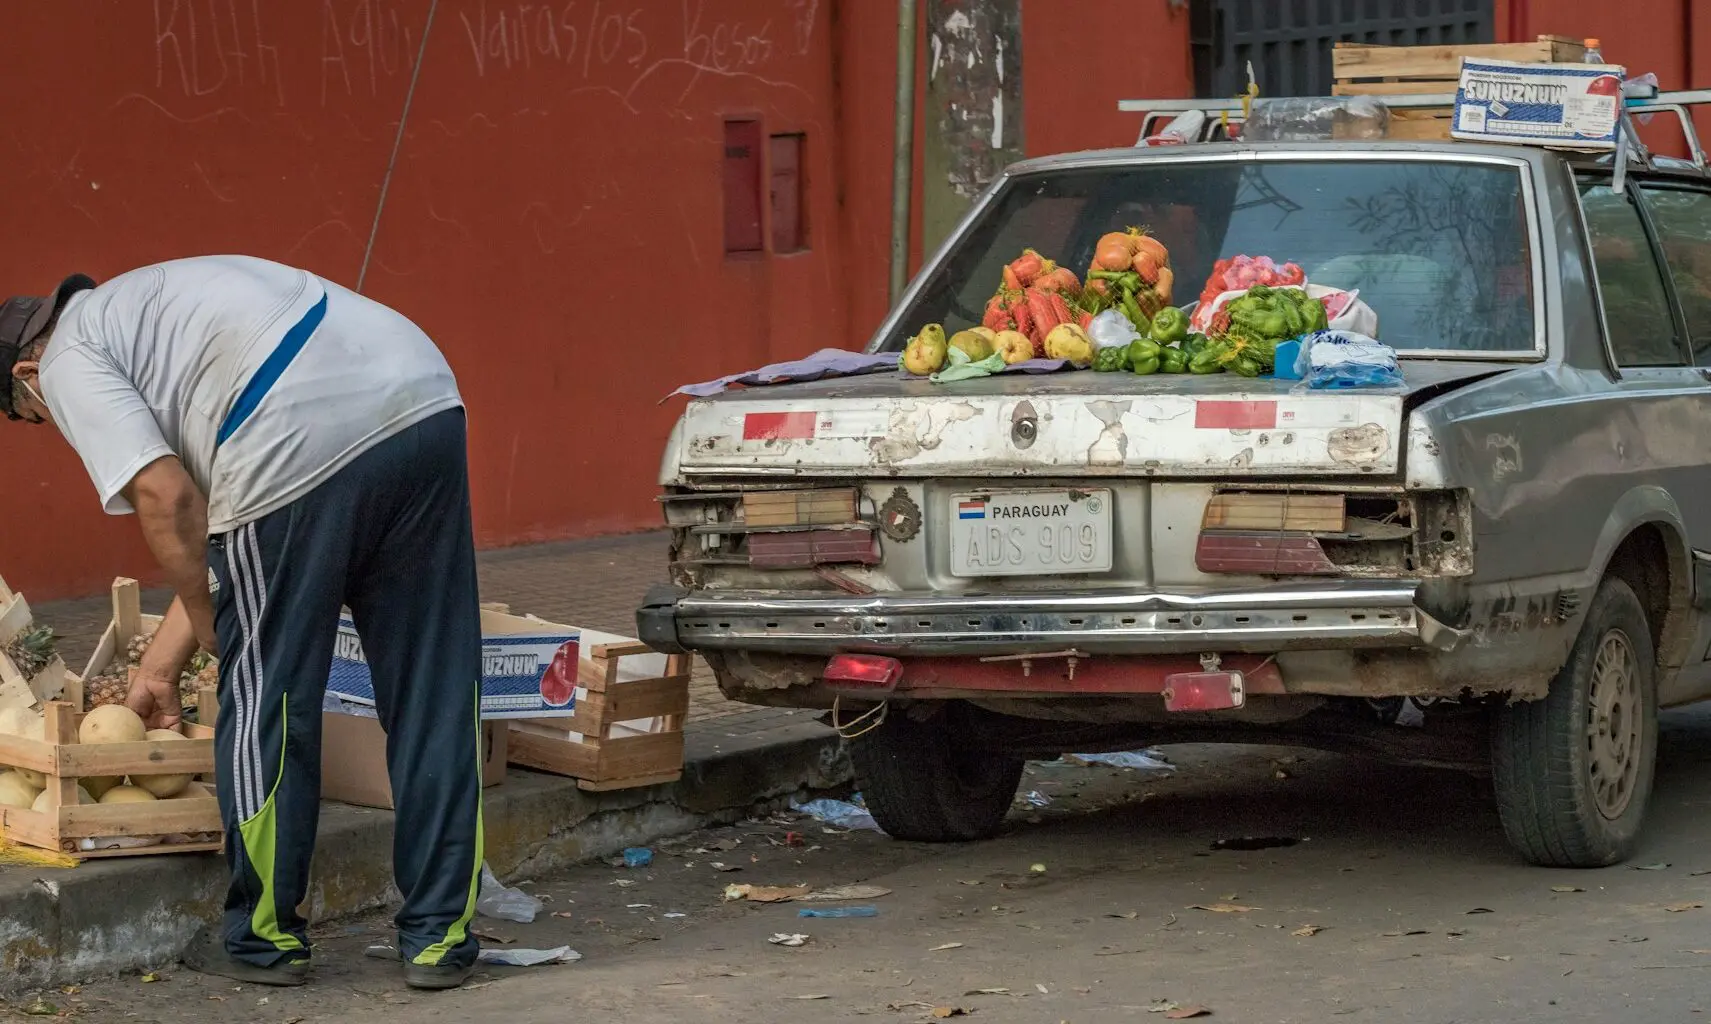 A person is bending over to sort items beside an old, damaged car with various fruits and vegetables on its trunk, parked on a street.